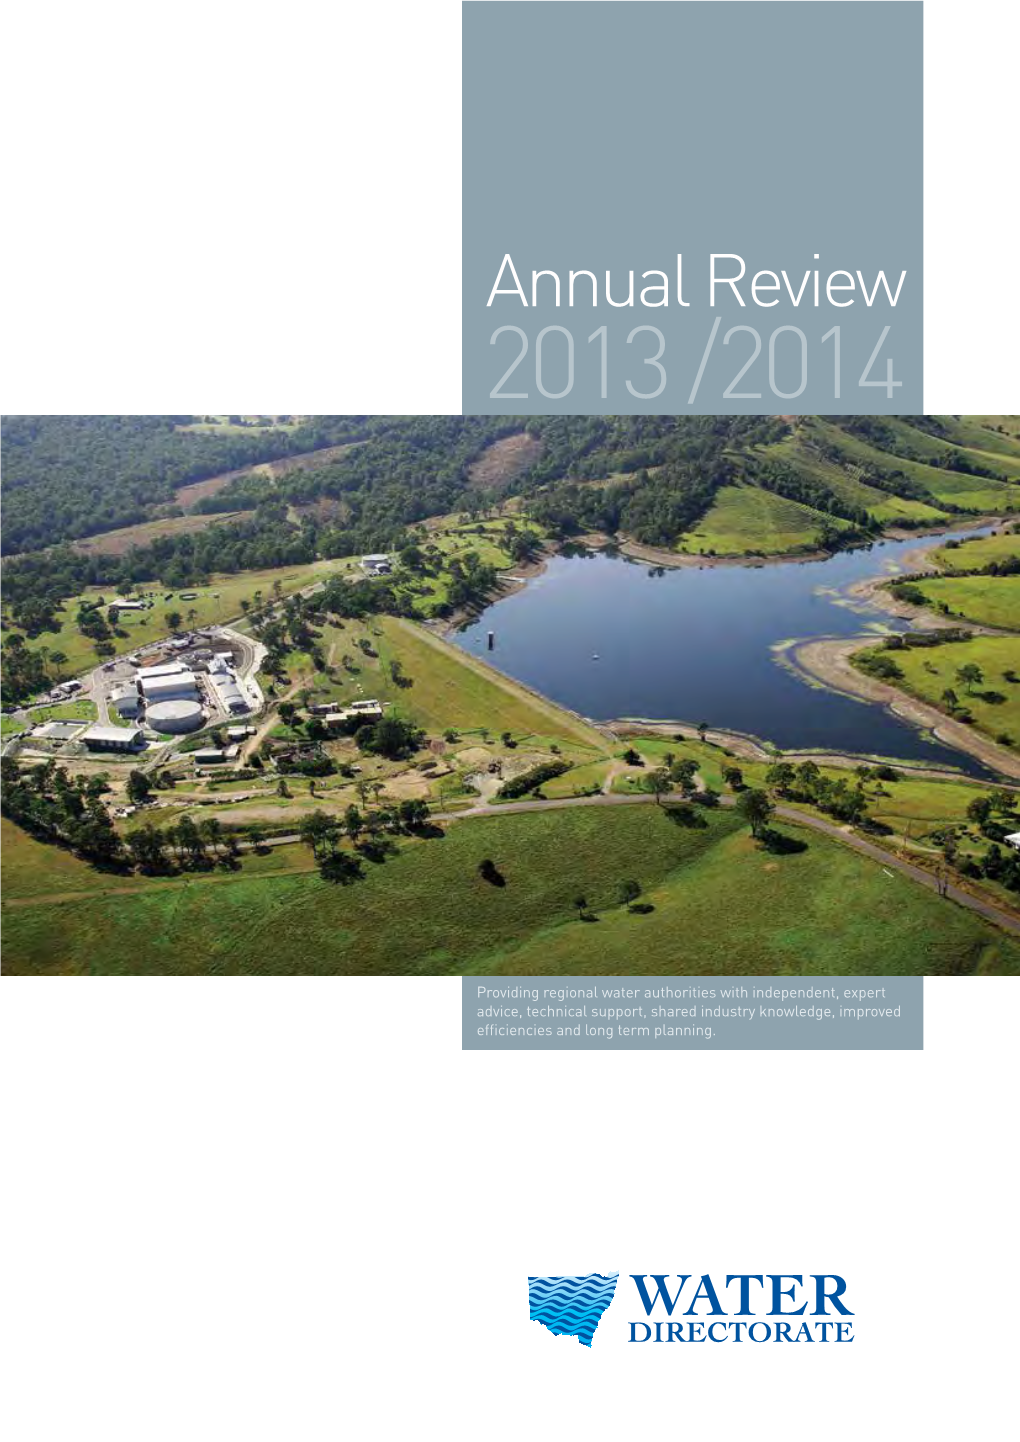 2013/14 Annual Review